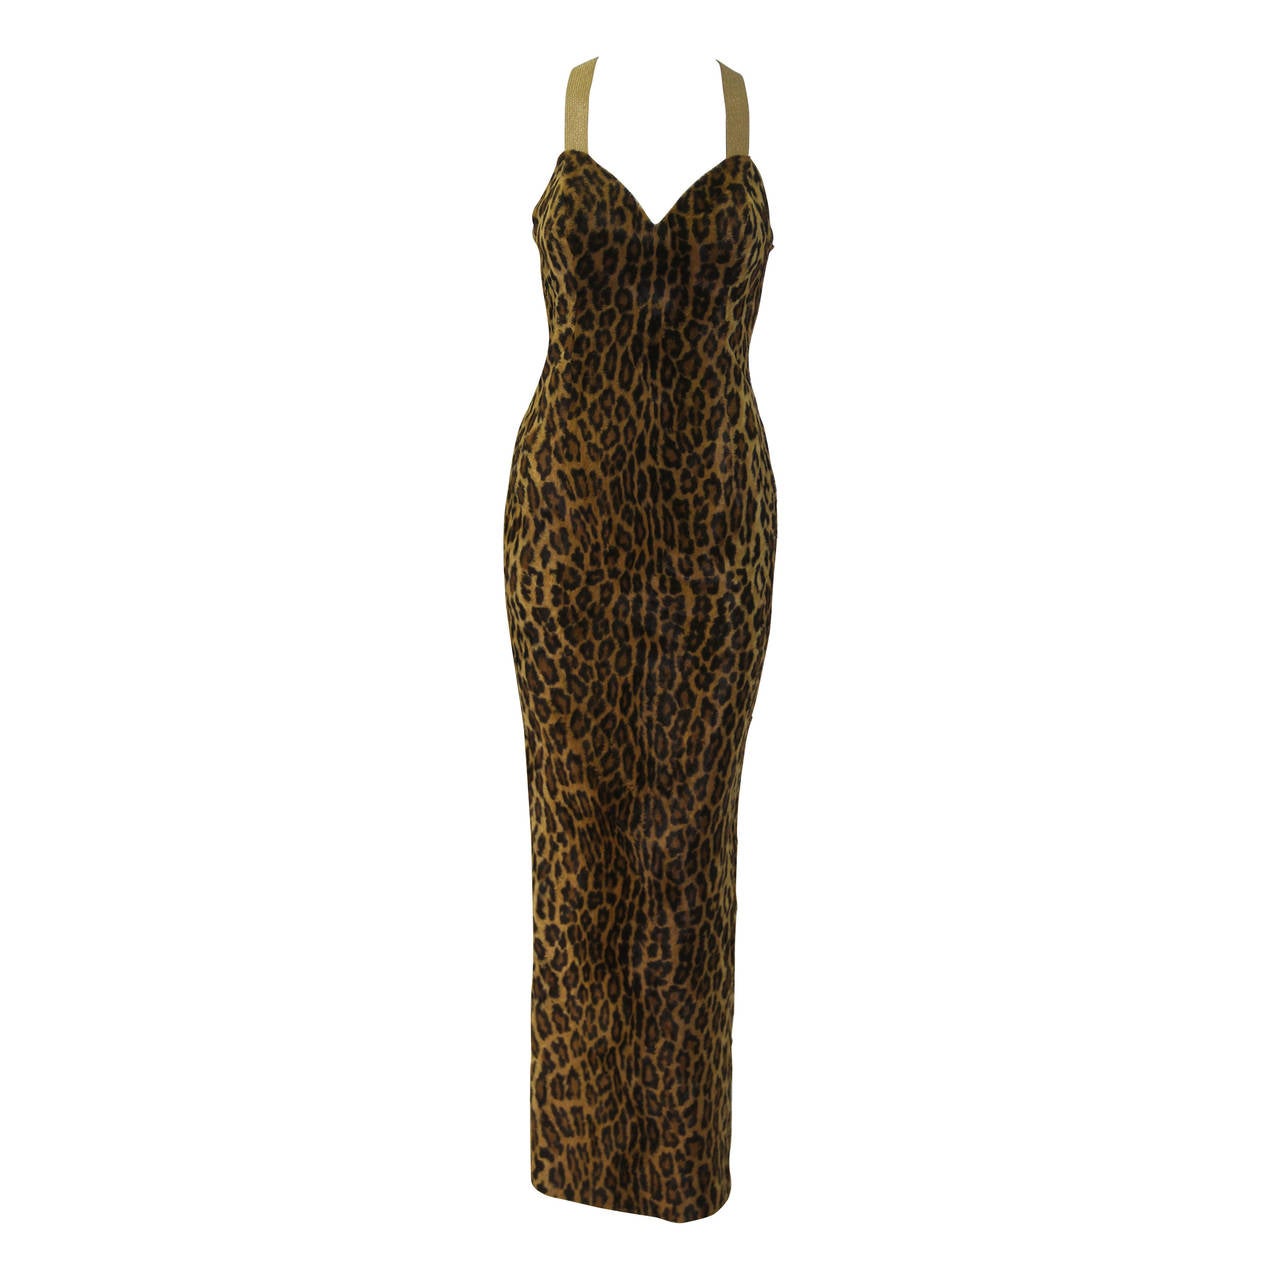 Museum Quality Gianni Versace Animal Print Fur Evening Gown 1994 For Sale